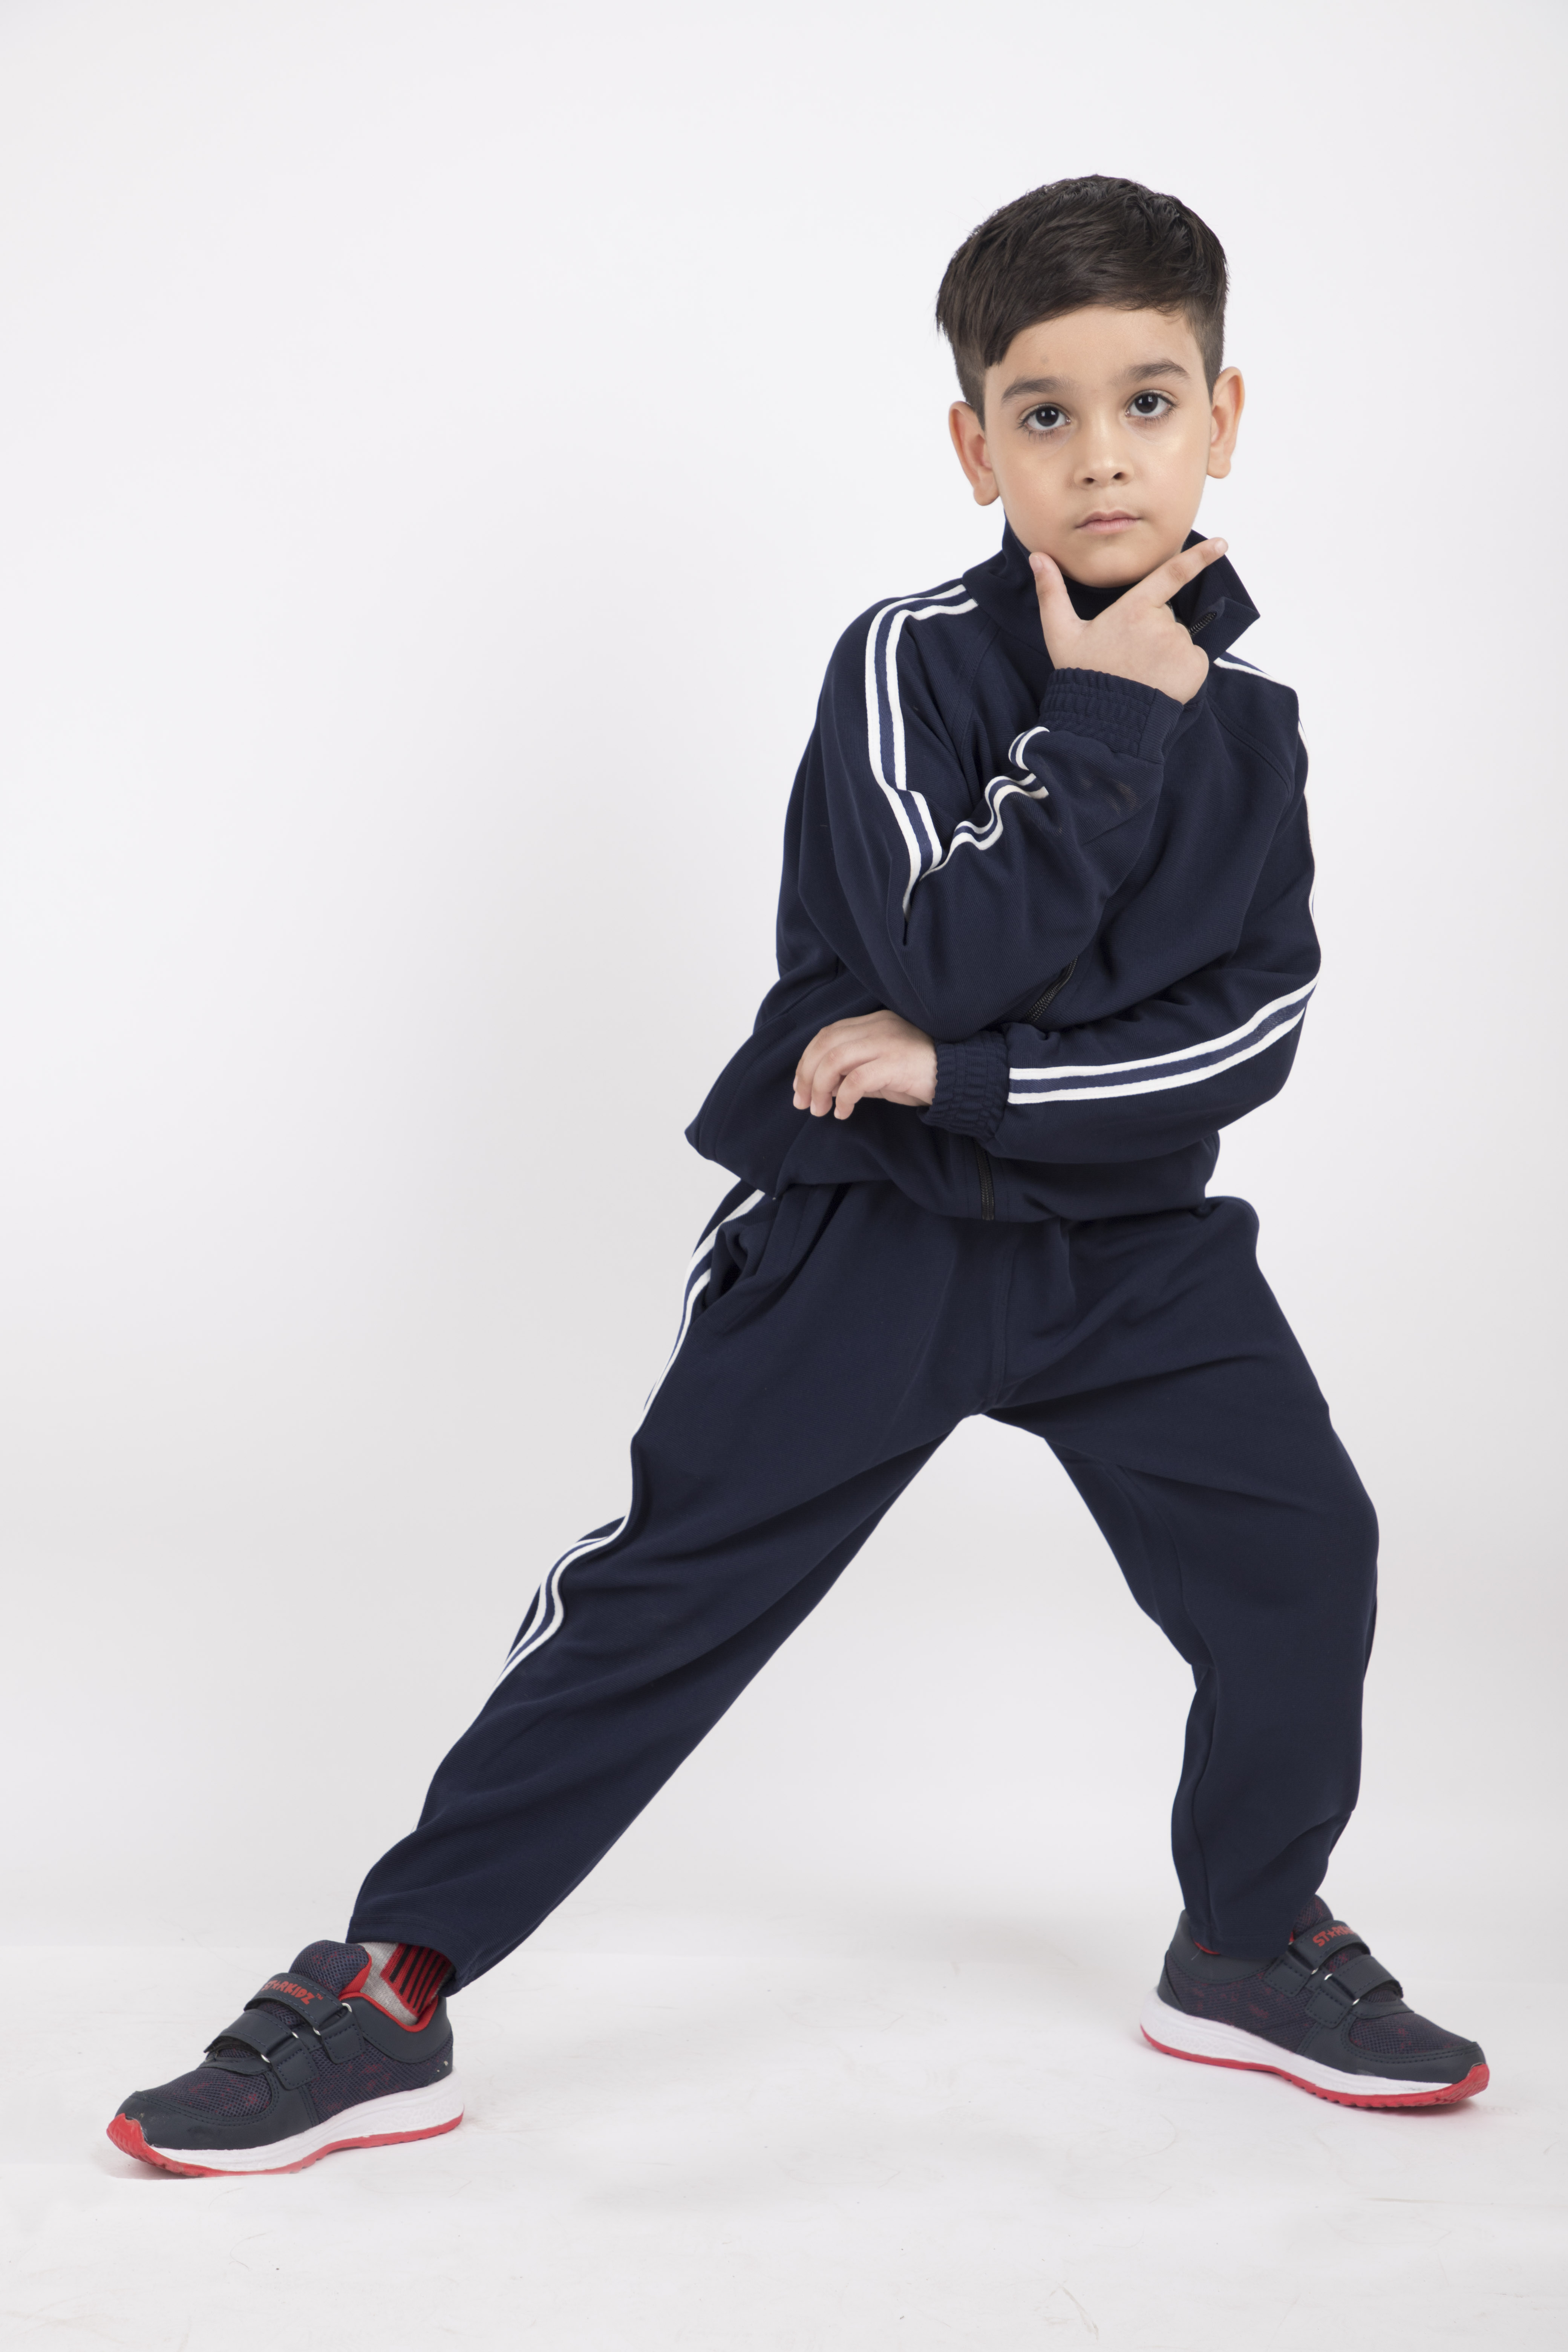 Buy iSHU Solid Boys Girls Track Suit Online @ ₹509 from ShopClues